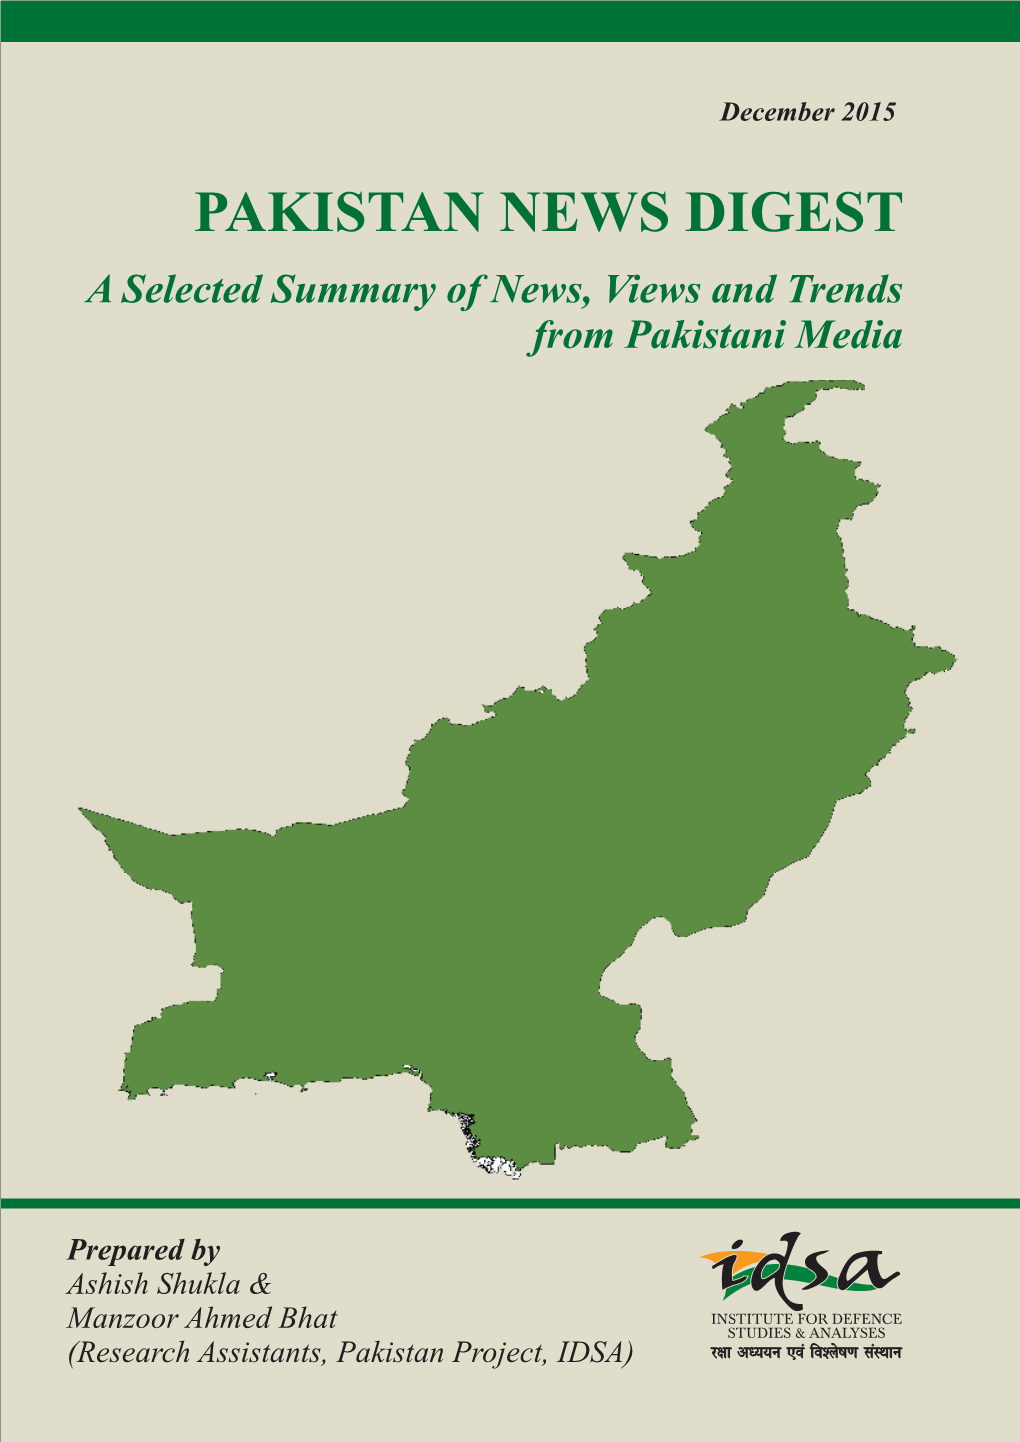 December 2015 PAKISTAN NEWS DIGEST a Selected Summary of News, Views and Trends from Pakistani Media